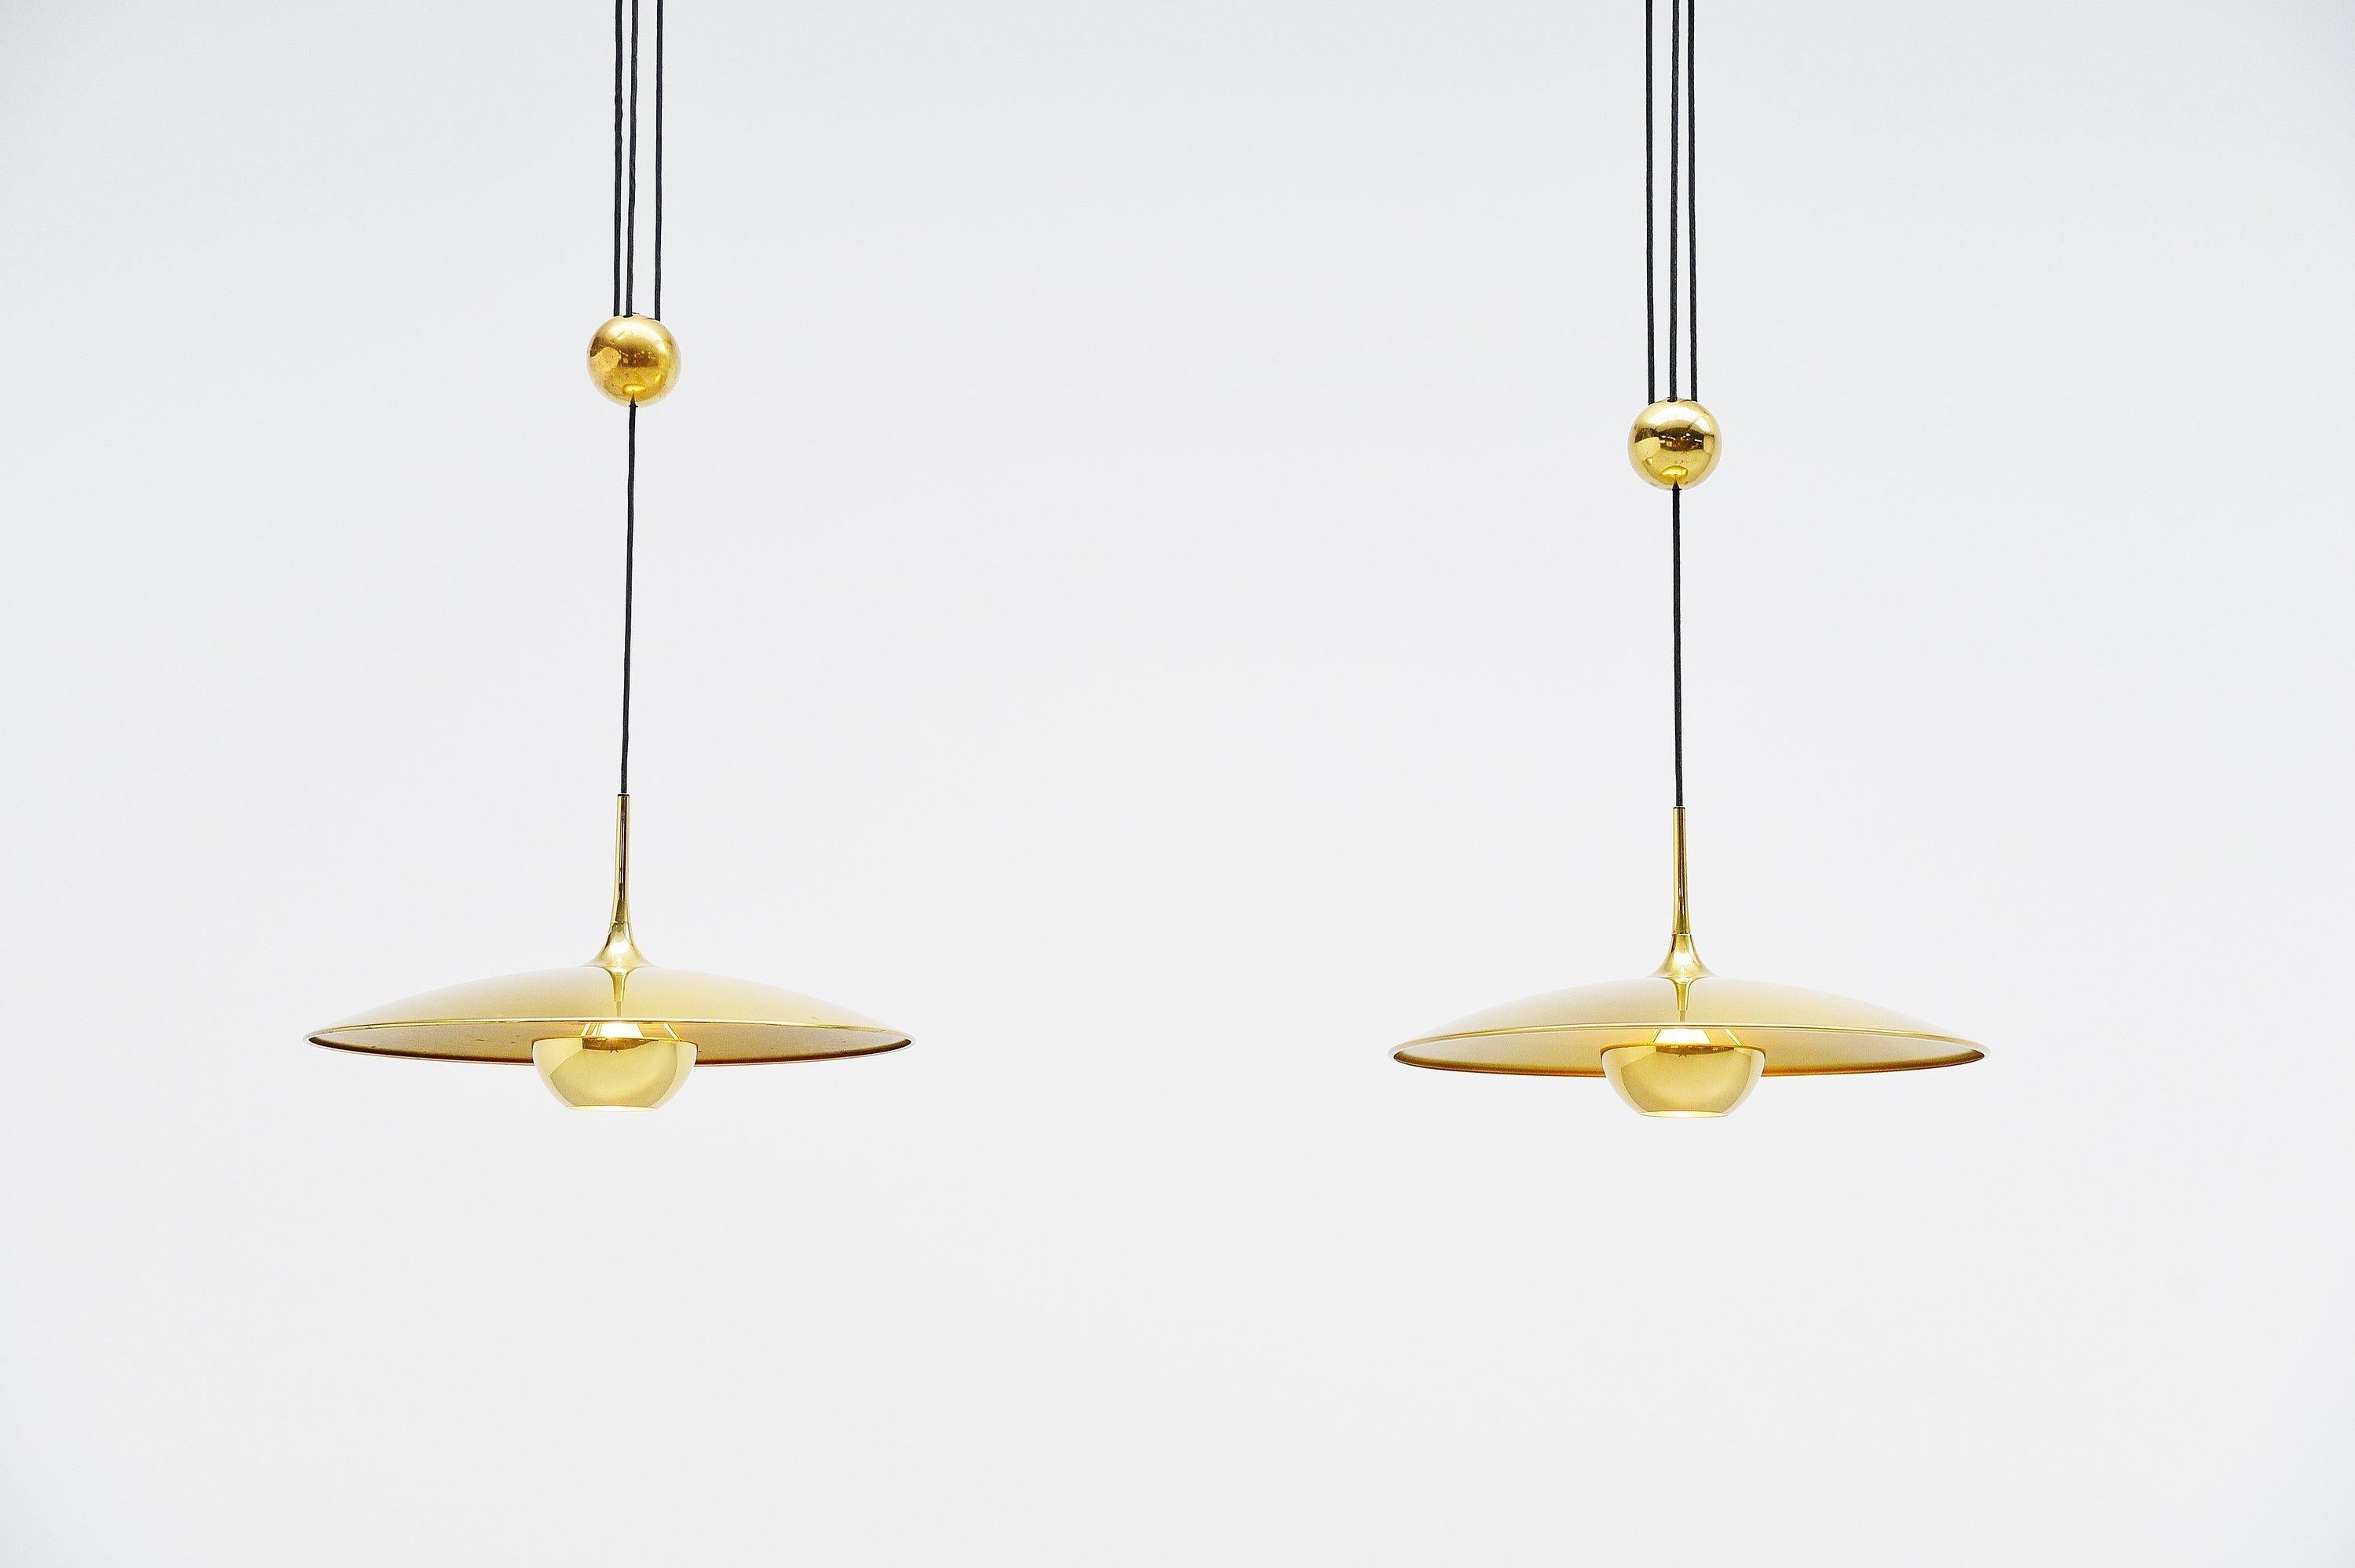 Late 20th Century Florian Schulz Onos 55 Balance Ceiling Lamp, Germany, 1970